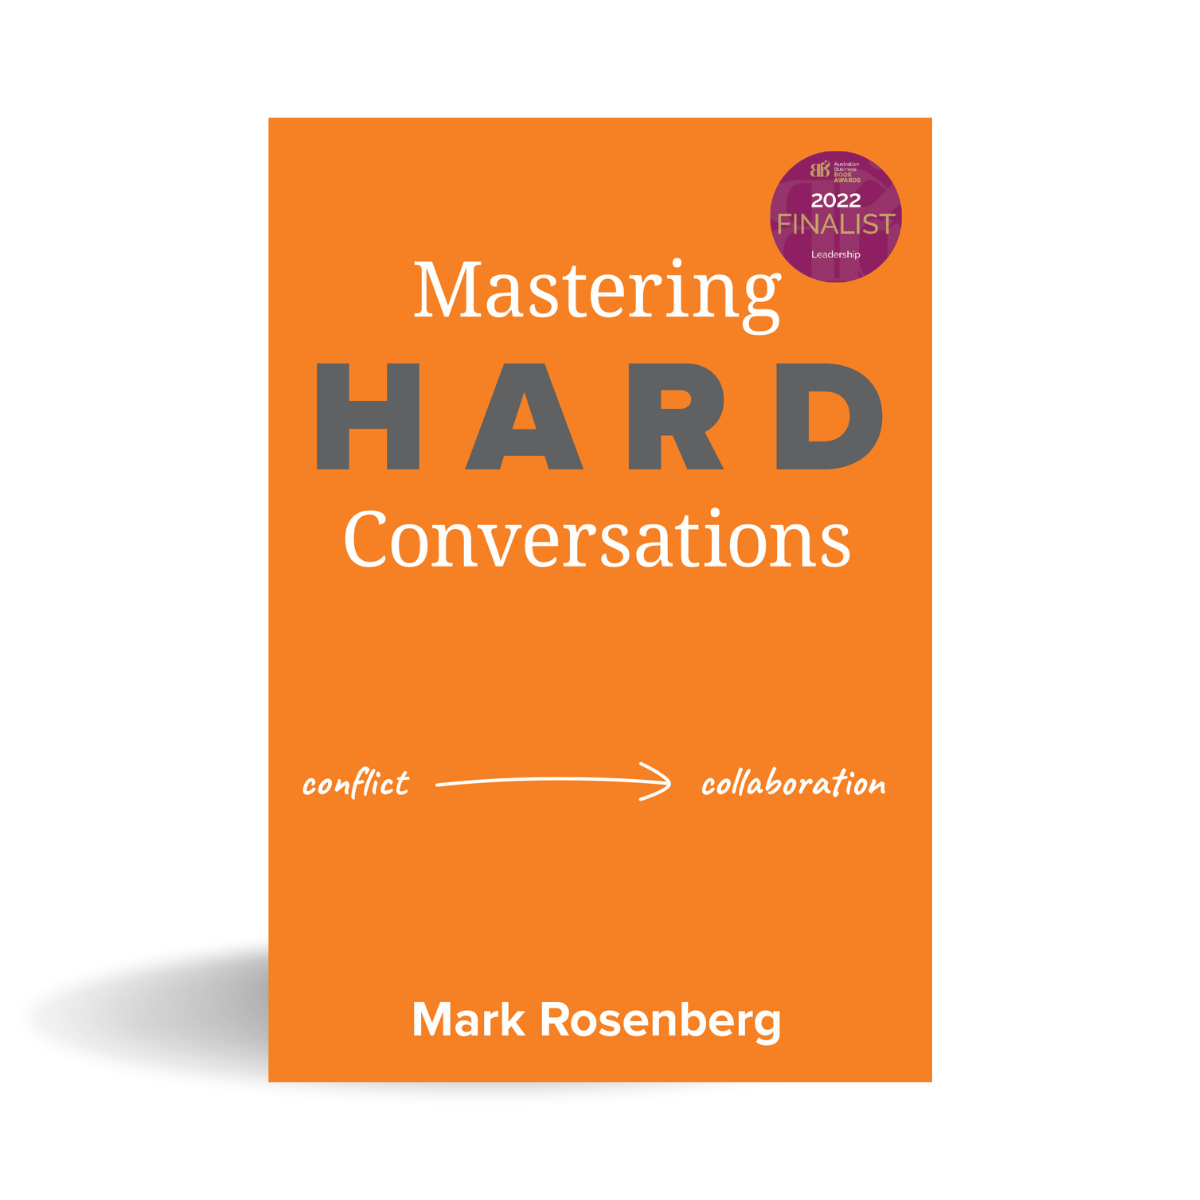 Mastering Hard Conversations book with an orange cover and white and grey writing. There is an award sticker in the top right corner showing it was a Finalist in the Leadership category at the Australian Business Book Awards 2022.